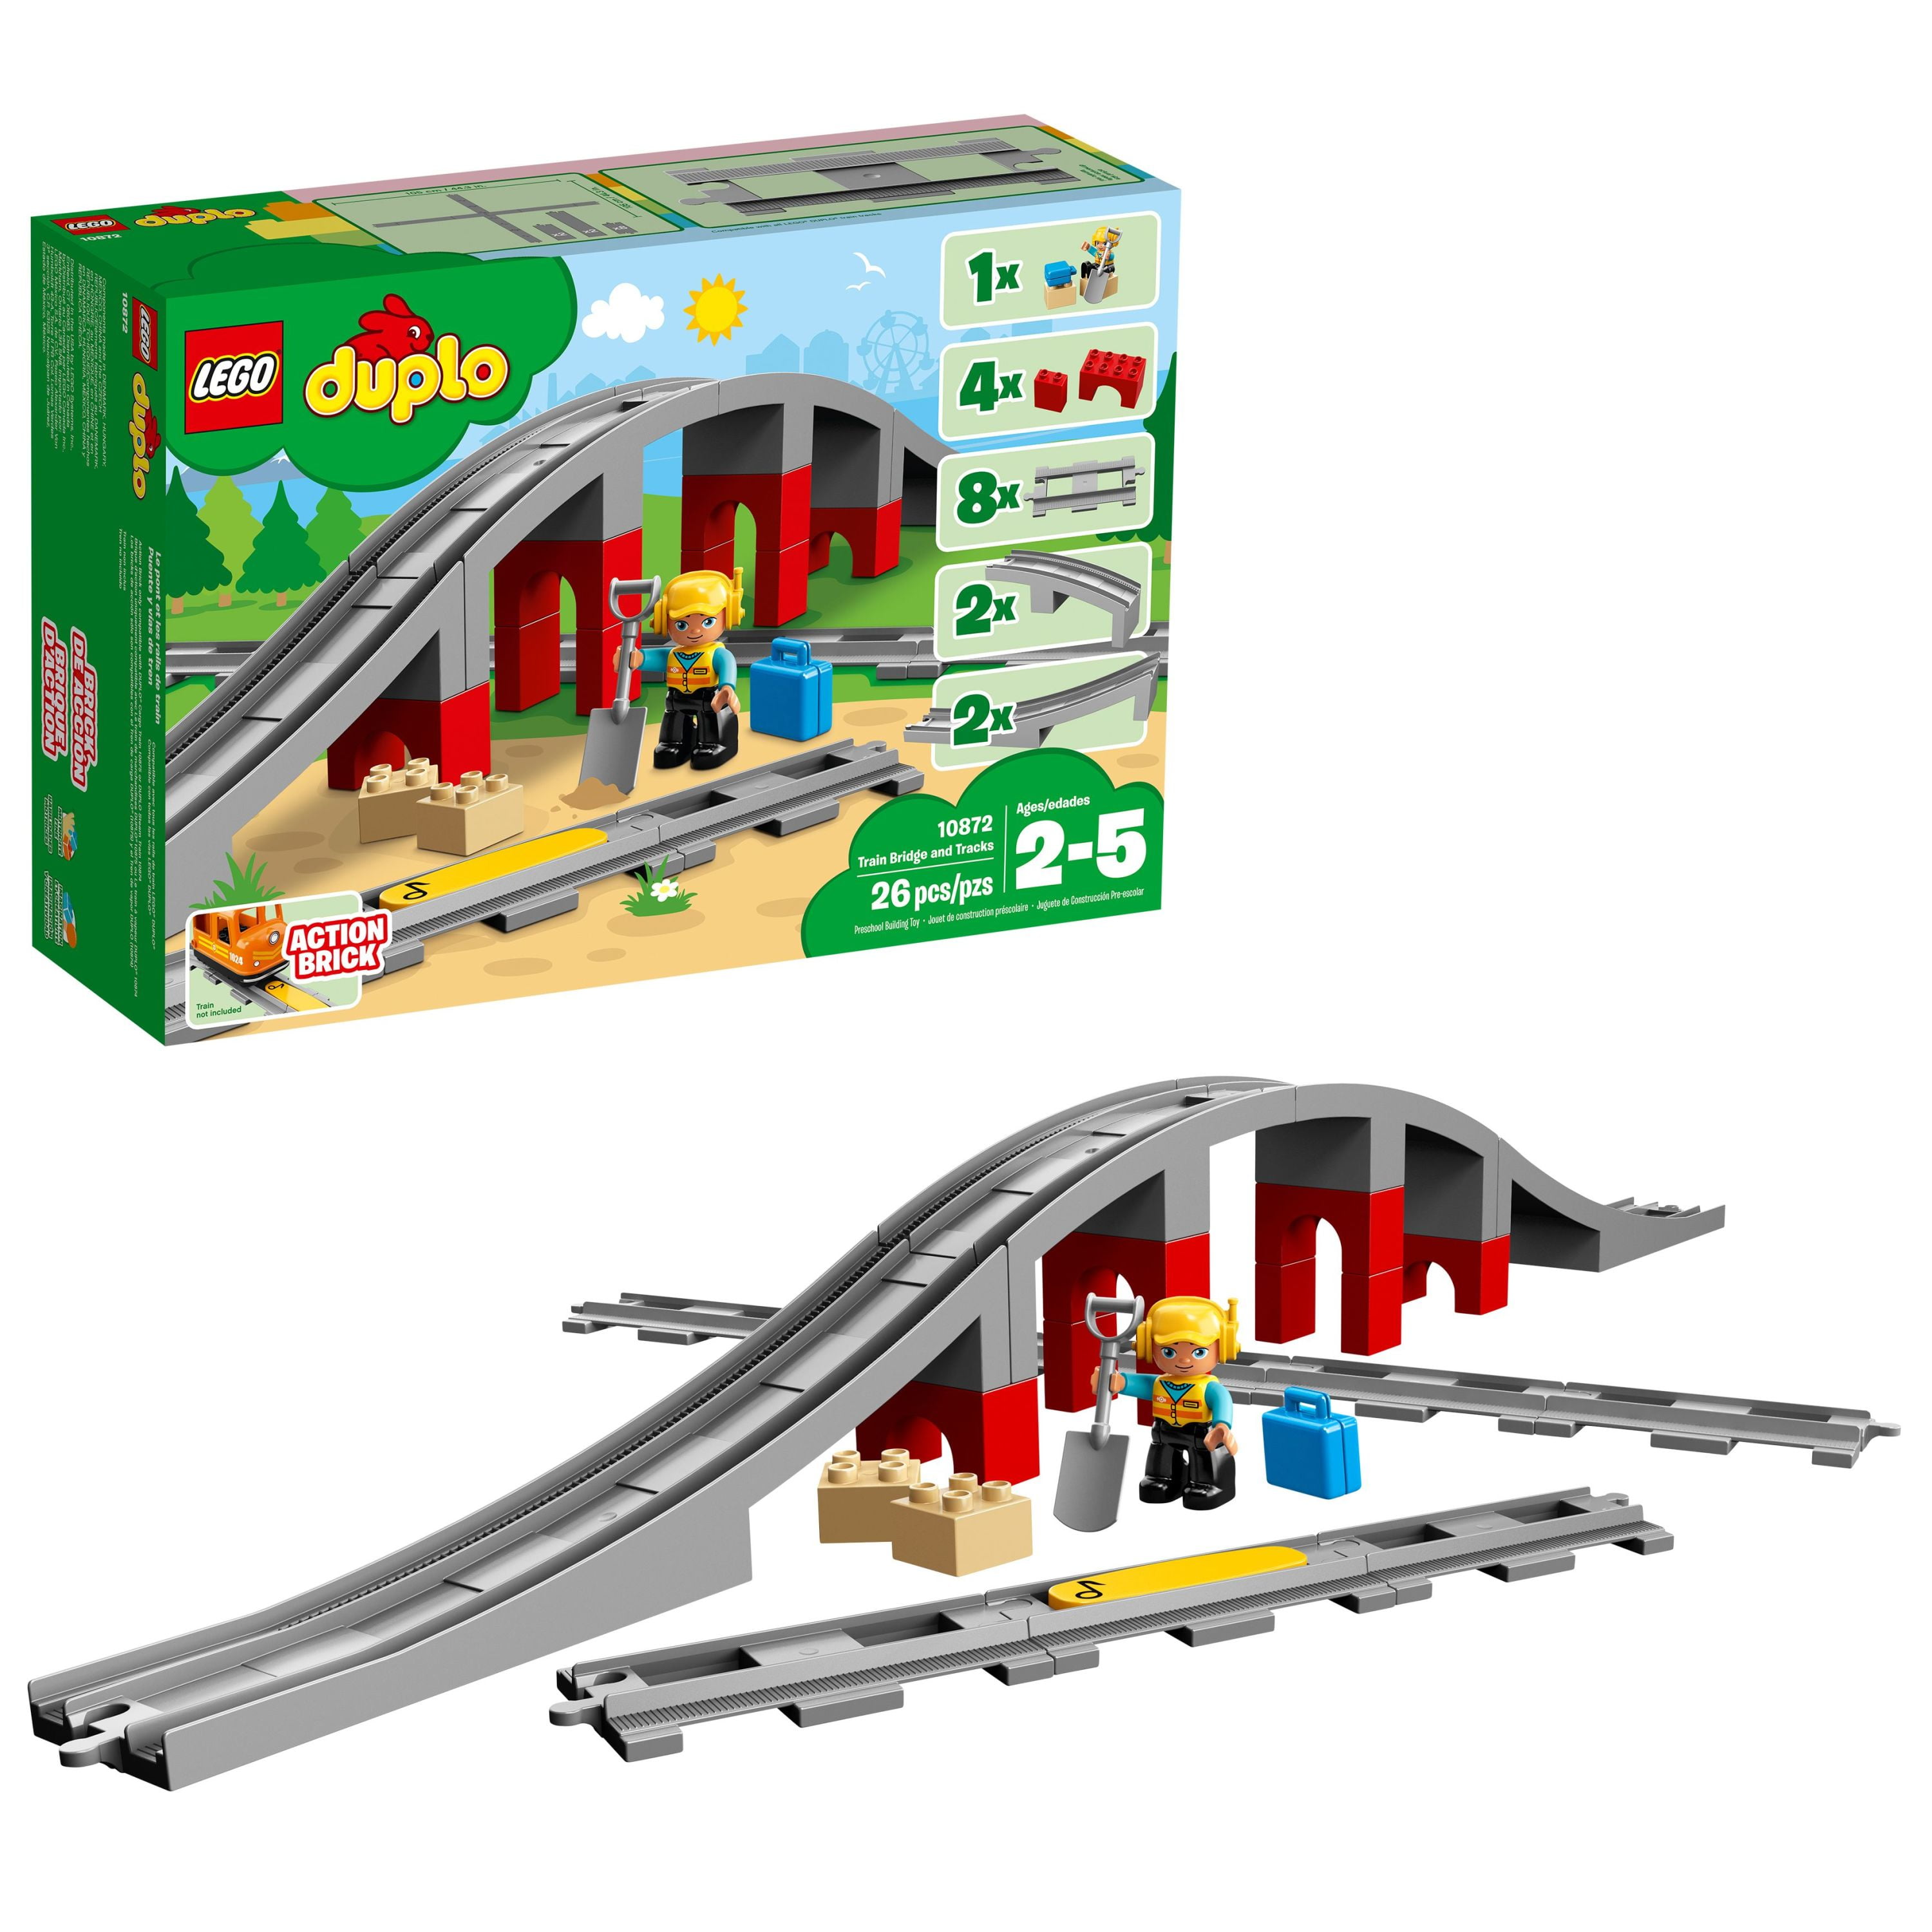 LEGO DUPLO Town Train Bridge and Tracks 10872 - Set for Kids and Toddlers, Railway Building Bricks Set with a Bridge, Figure, and Horn Sound Action Brick, Great Gift for Boys